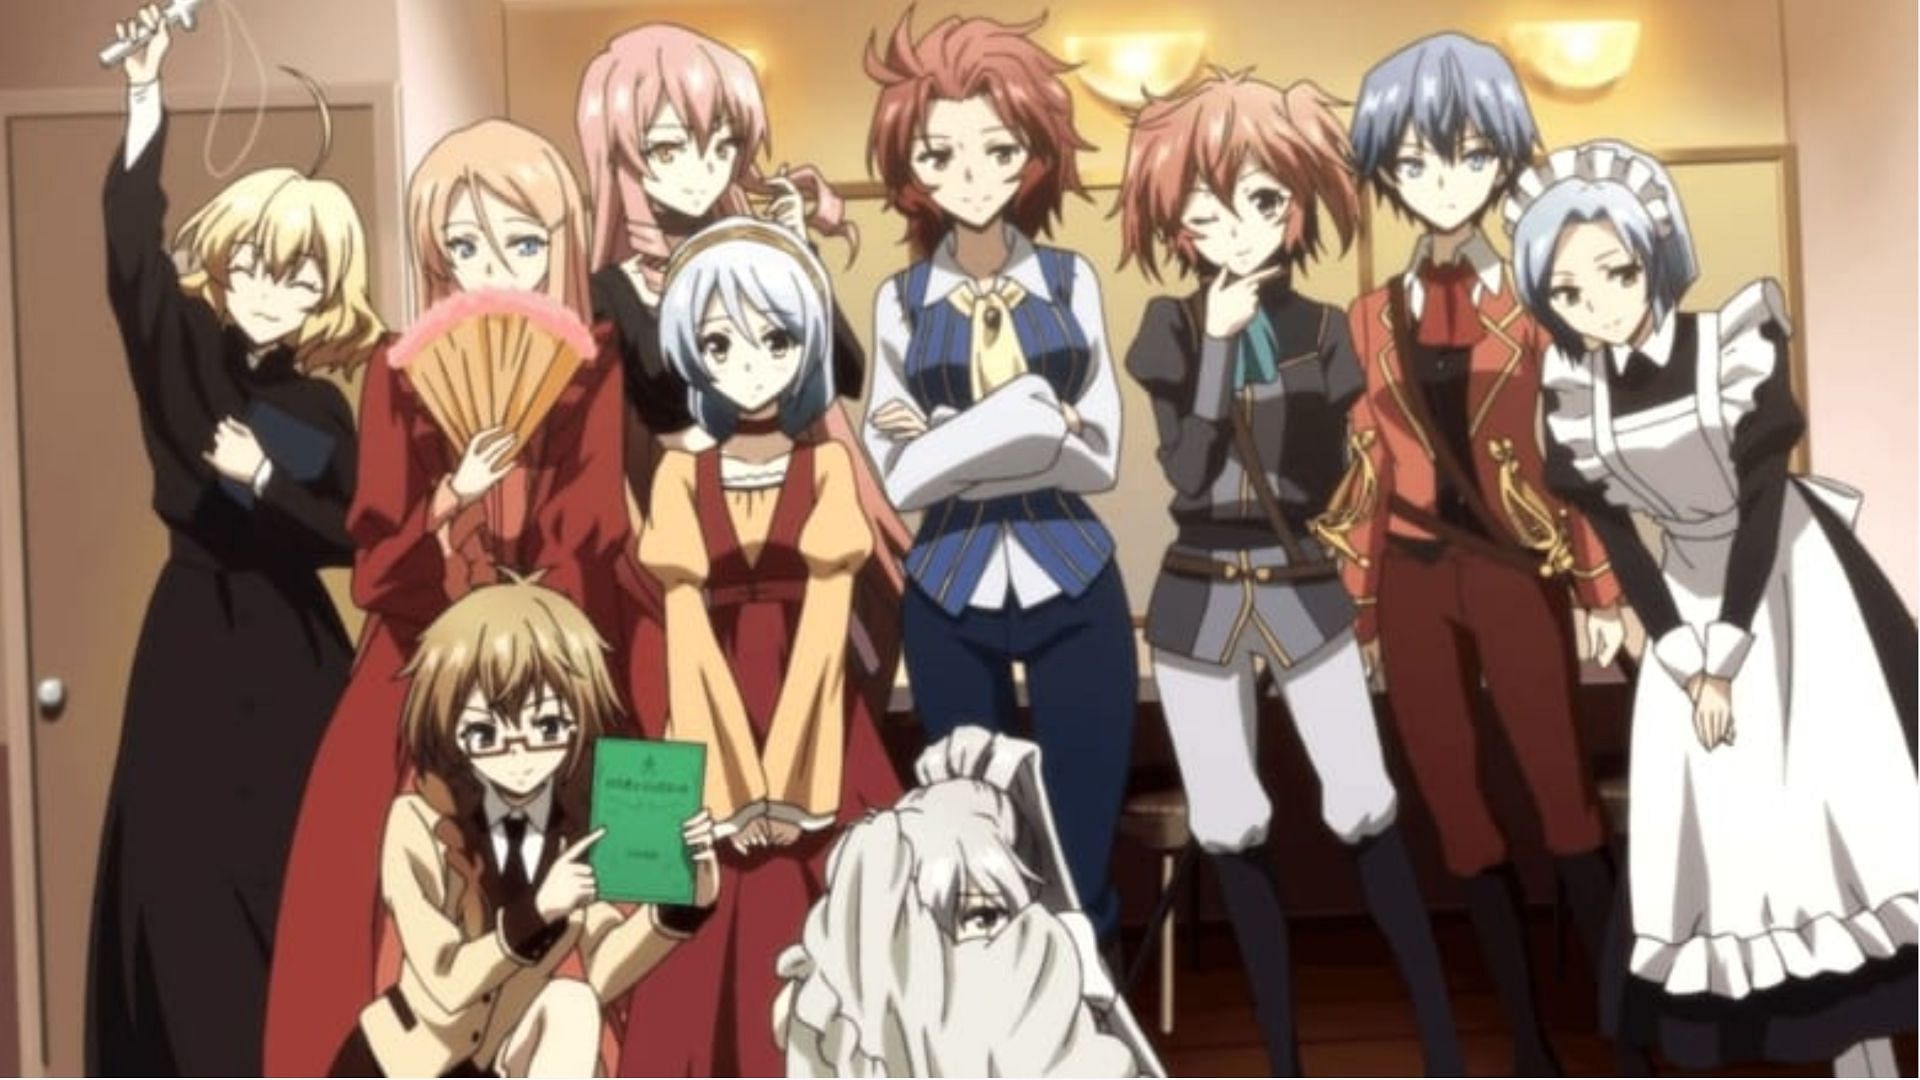 All characters in Riddle Story of a Devil (Image credits: Sunao Minakata/ Kadokawa/ Diomedéa/ Anime Limited)